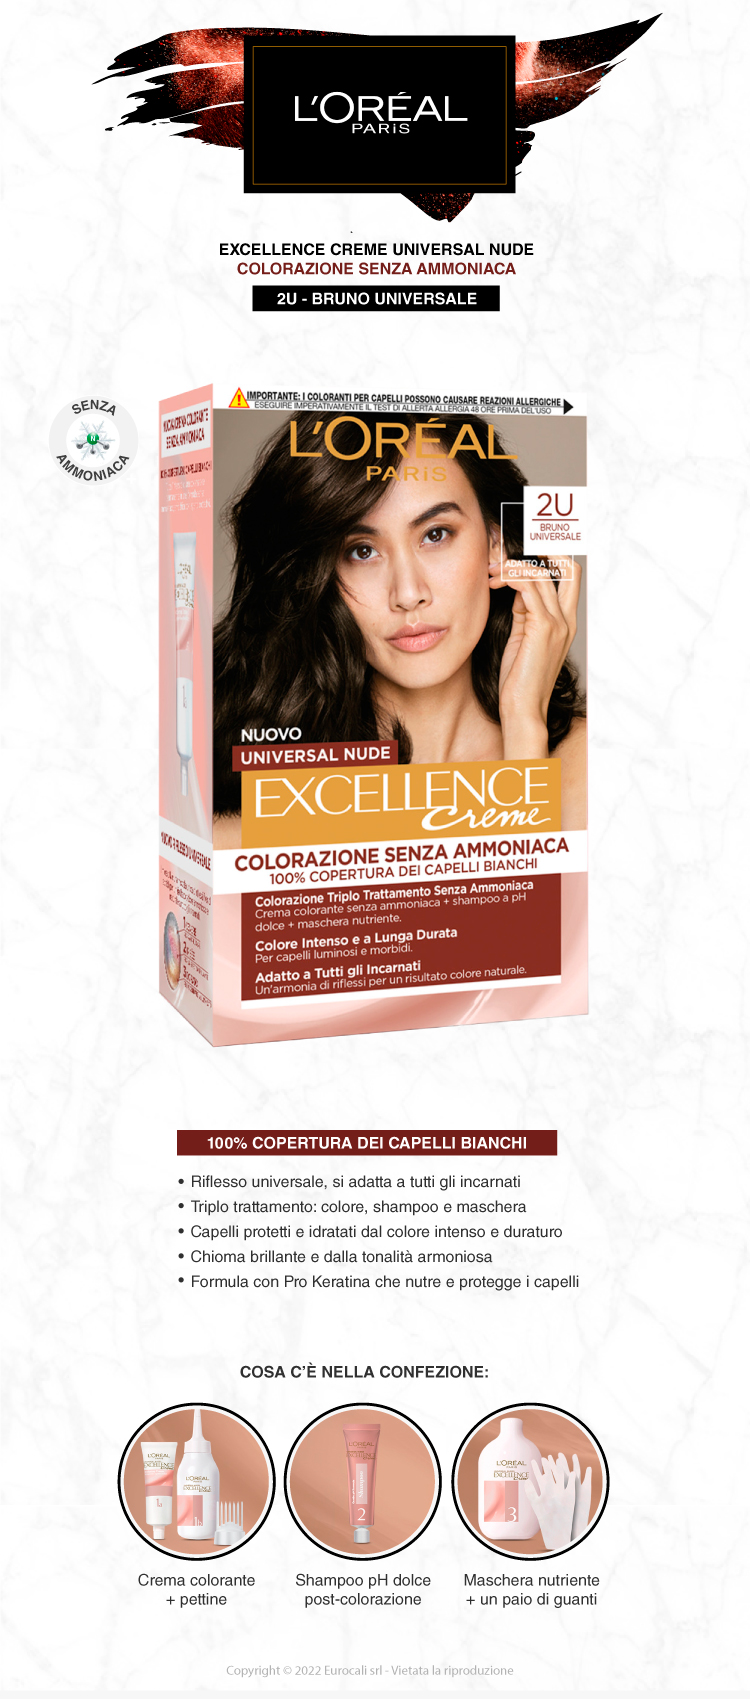 Excellence creme universal nude